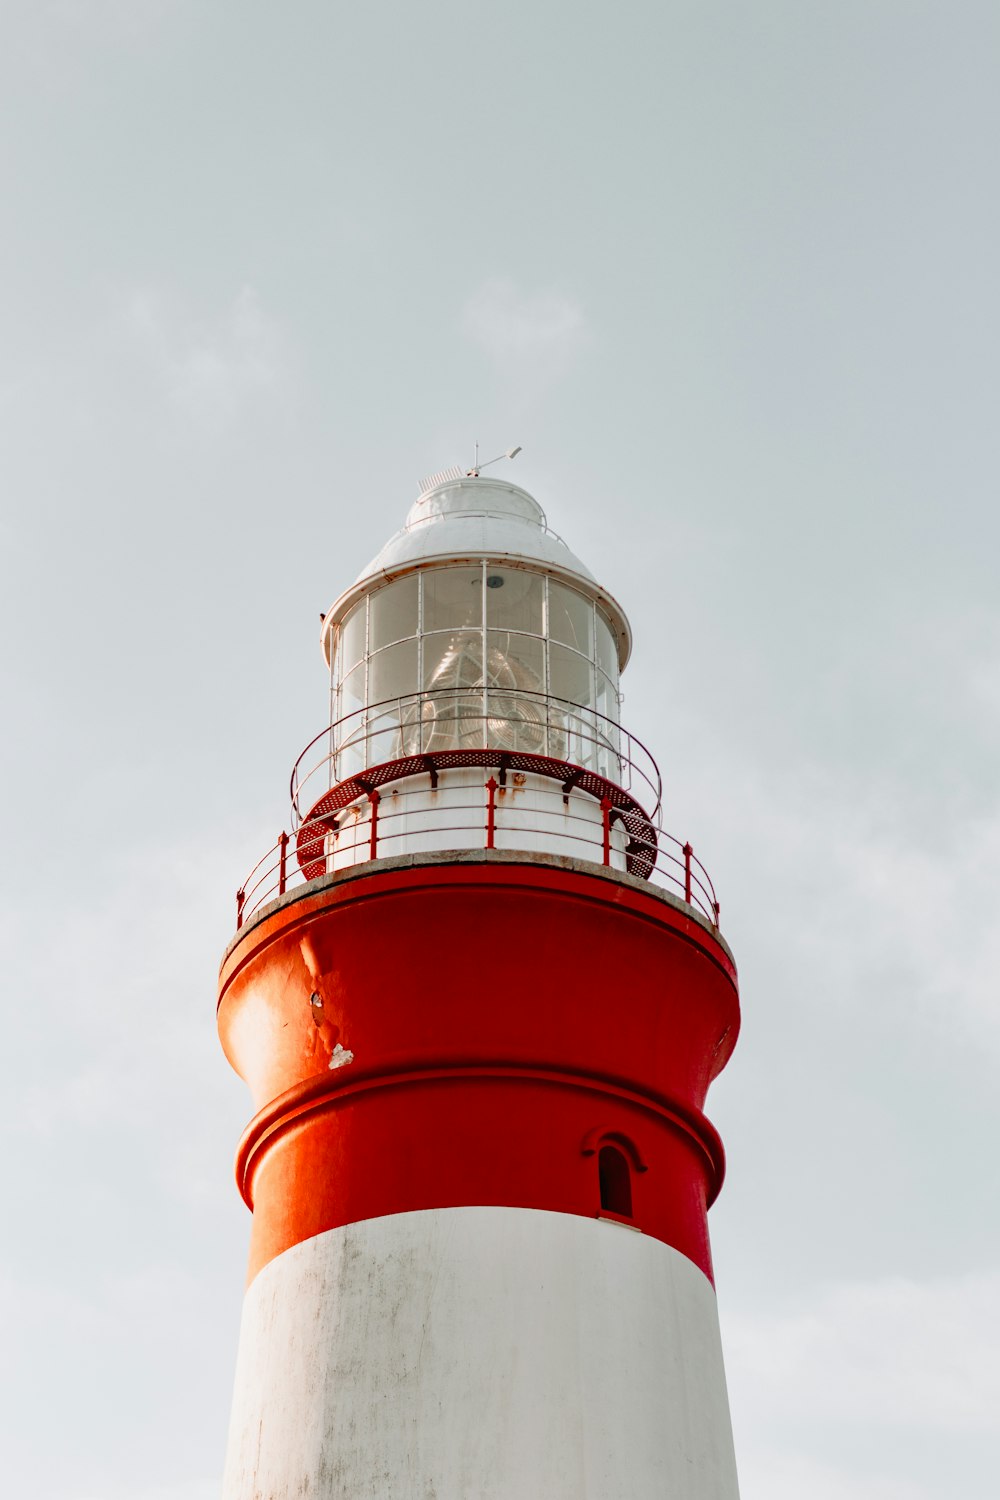 low-angle photography of white and red lighthouse during daytime